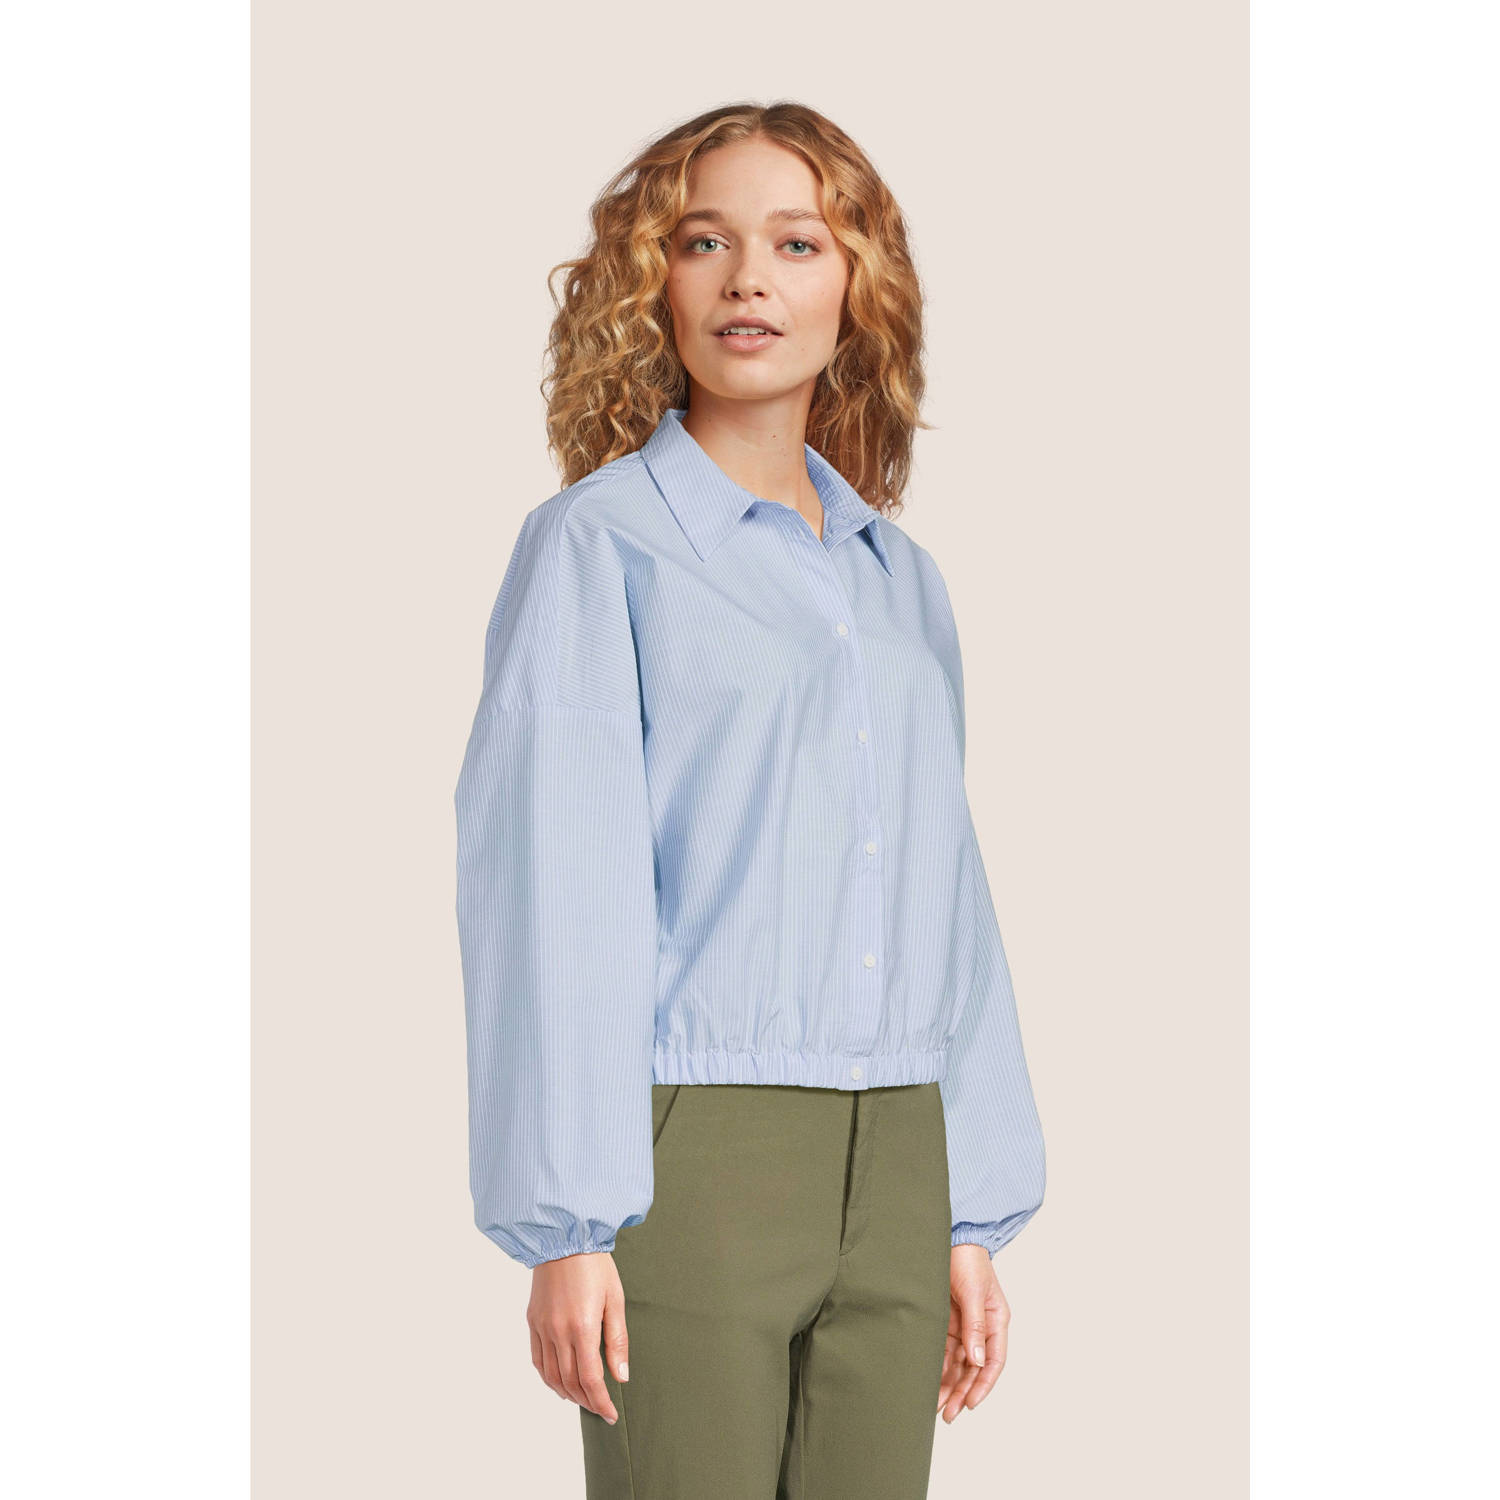 FREEQUENT gestreepte blouse blauw wit